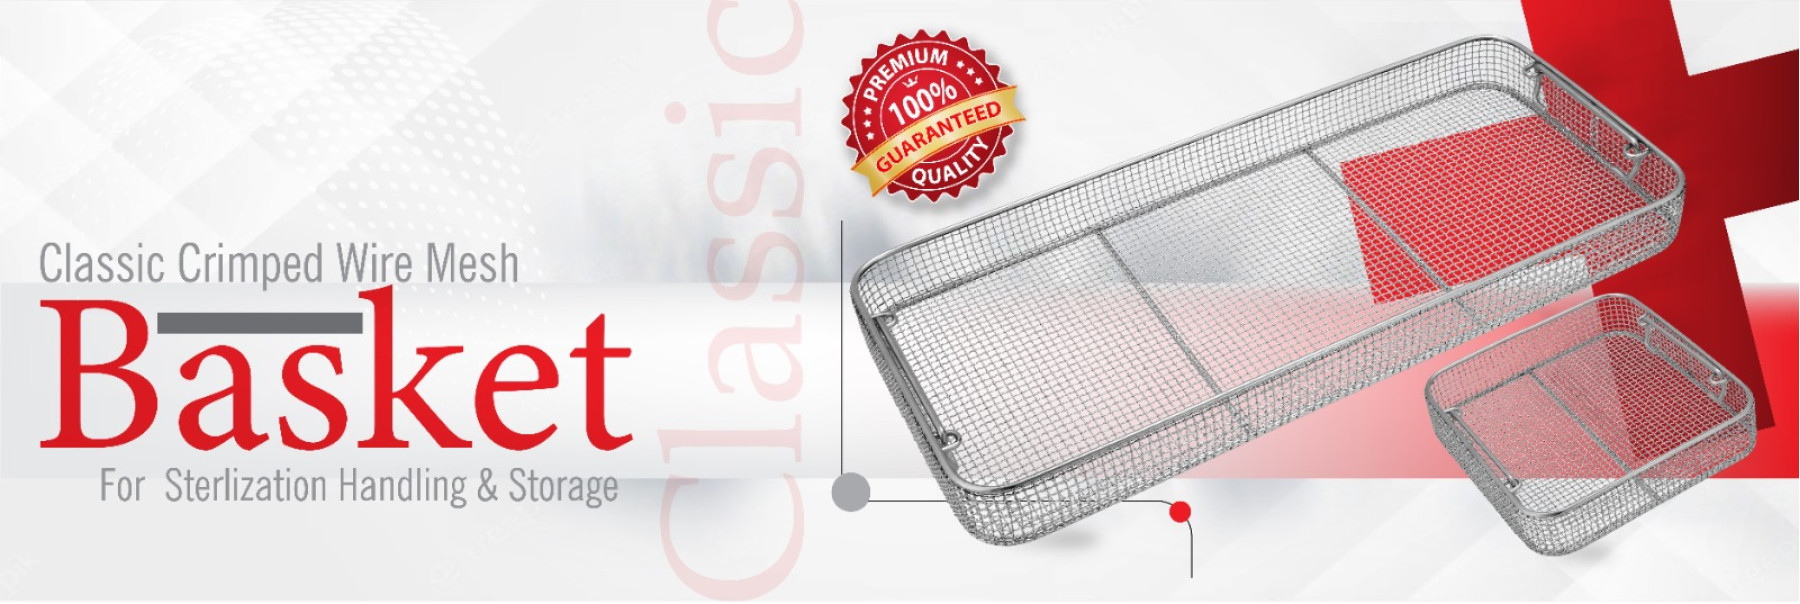 CLASSIC CRIMPED WIRE MESH BASKET